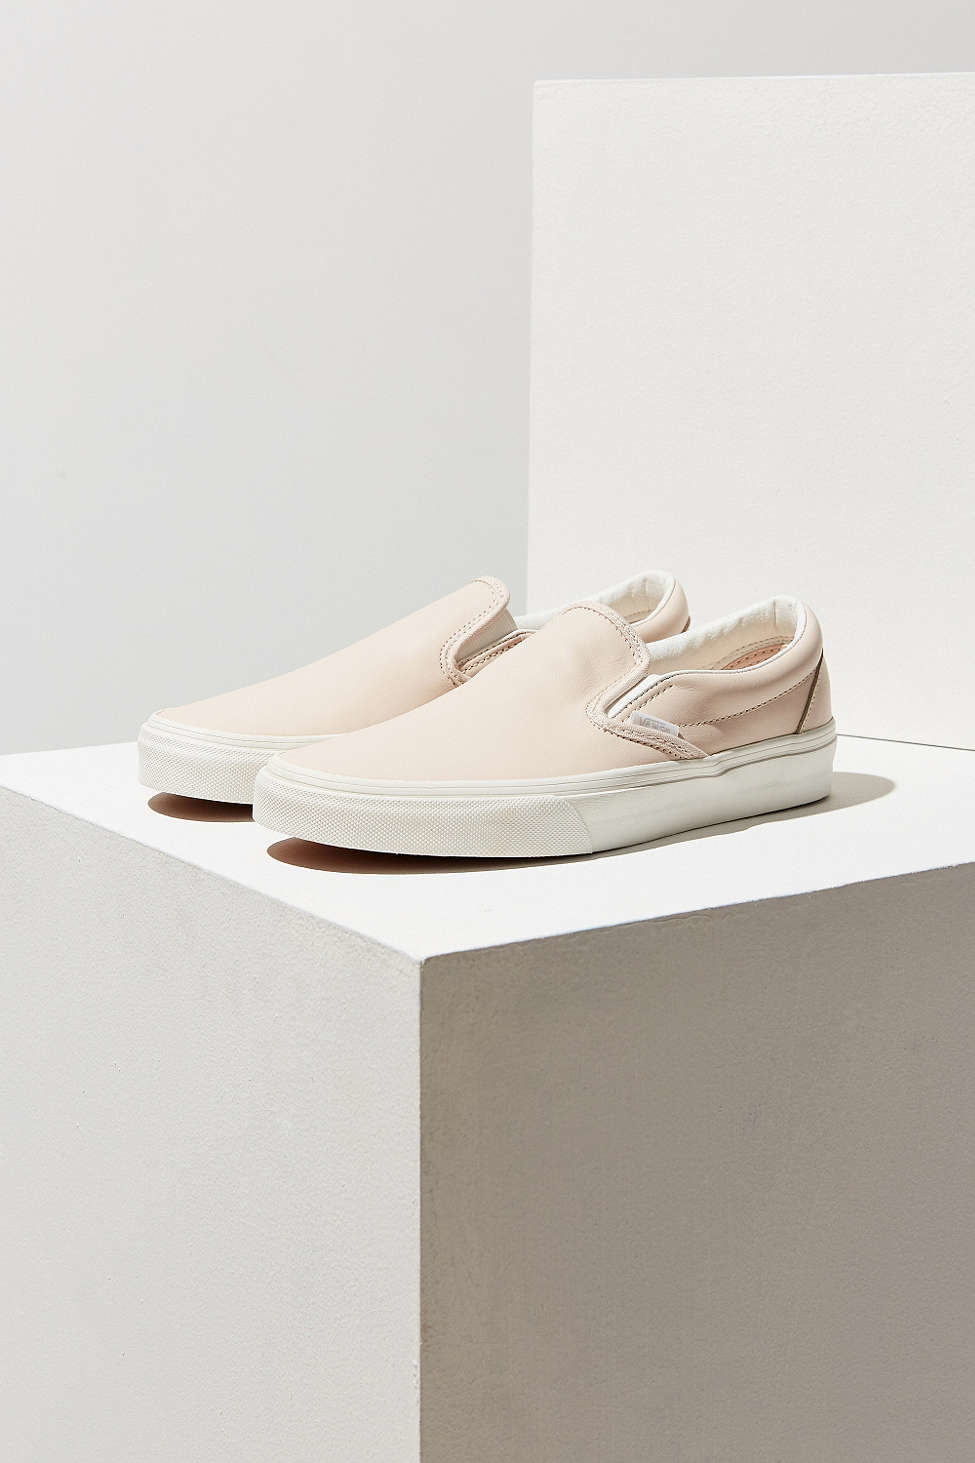 Vans Leather Classic Slip-on Sneaker in Cream (Natural) | Lyst